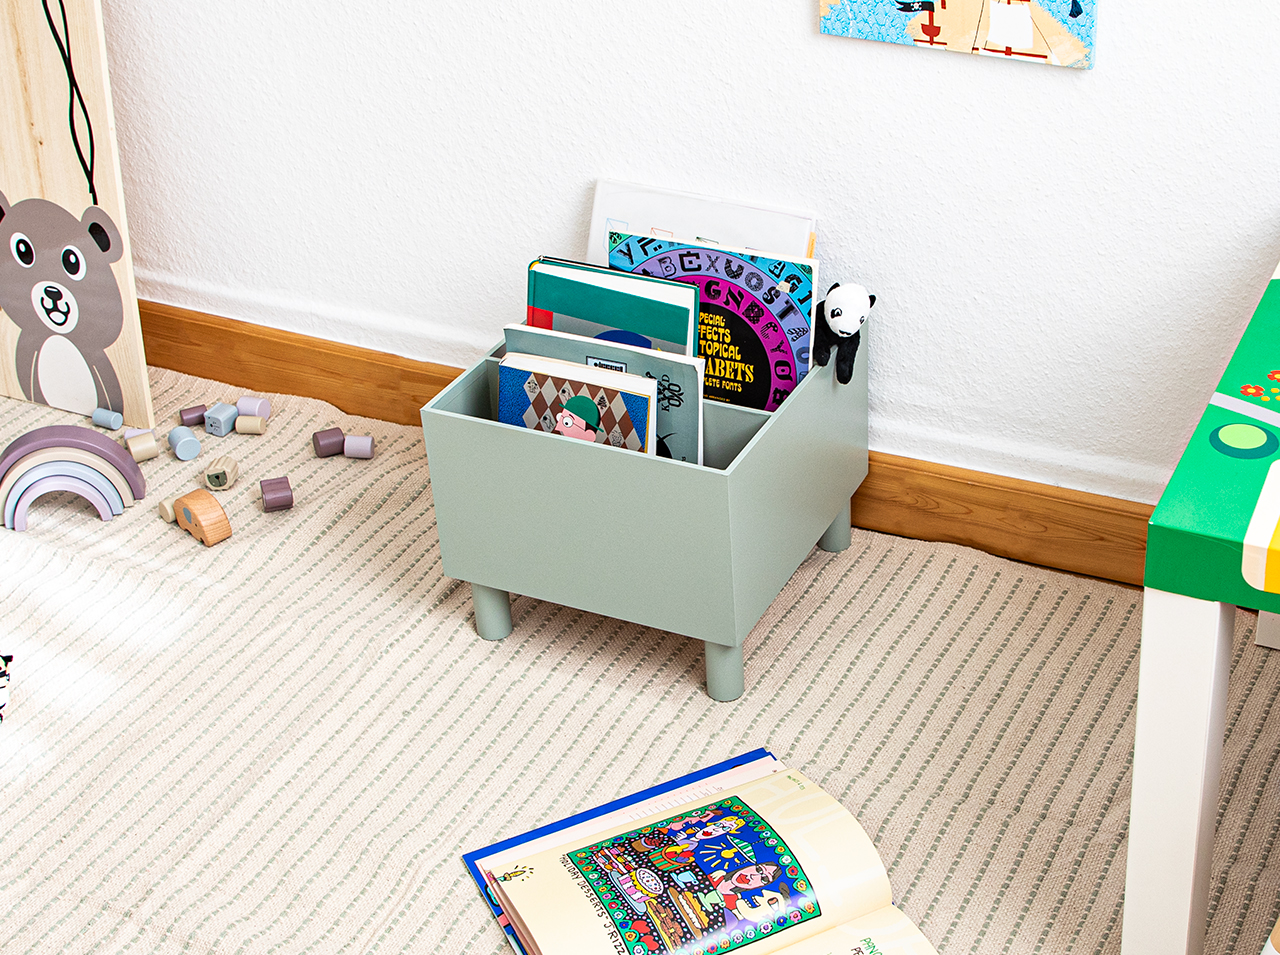 Ikea Moppe dresser covered with adhesive foil in sage green with function as a open-top storage file on legs for children’s books.